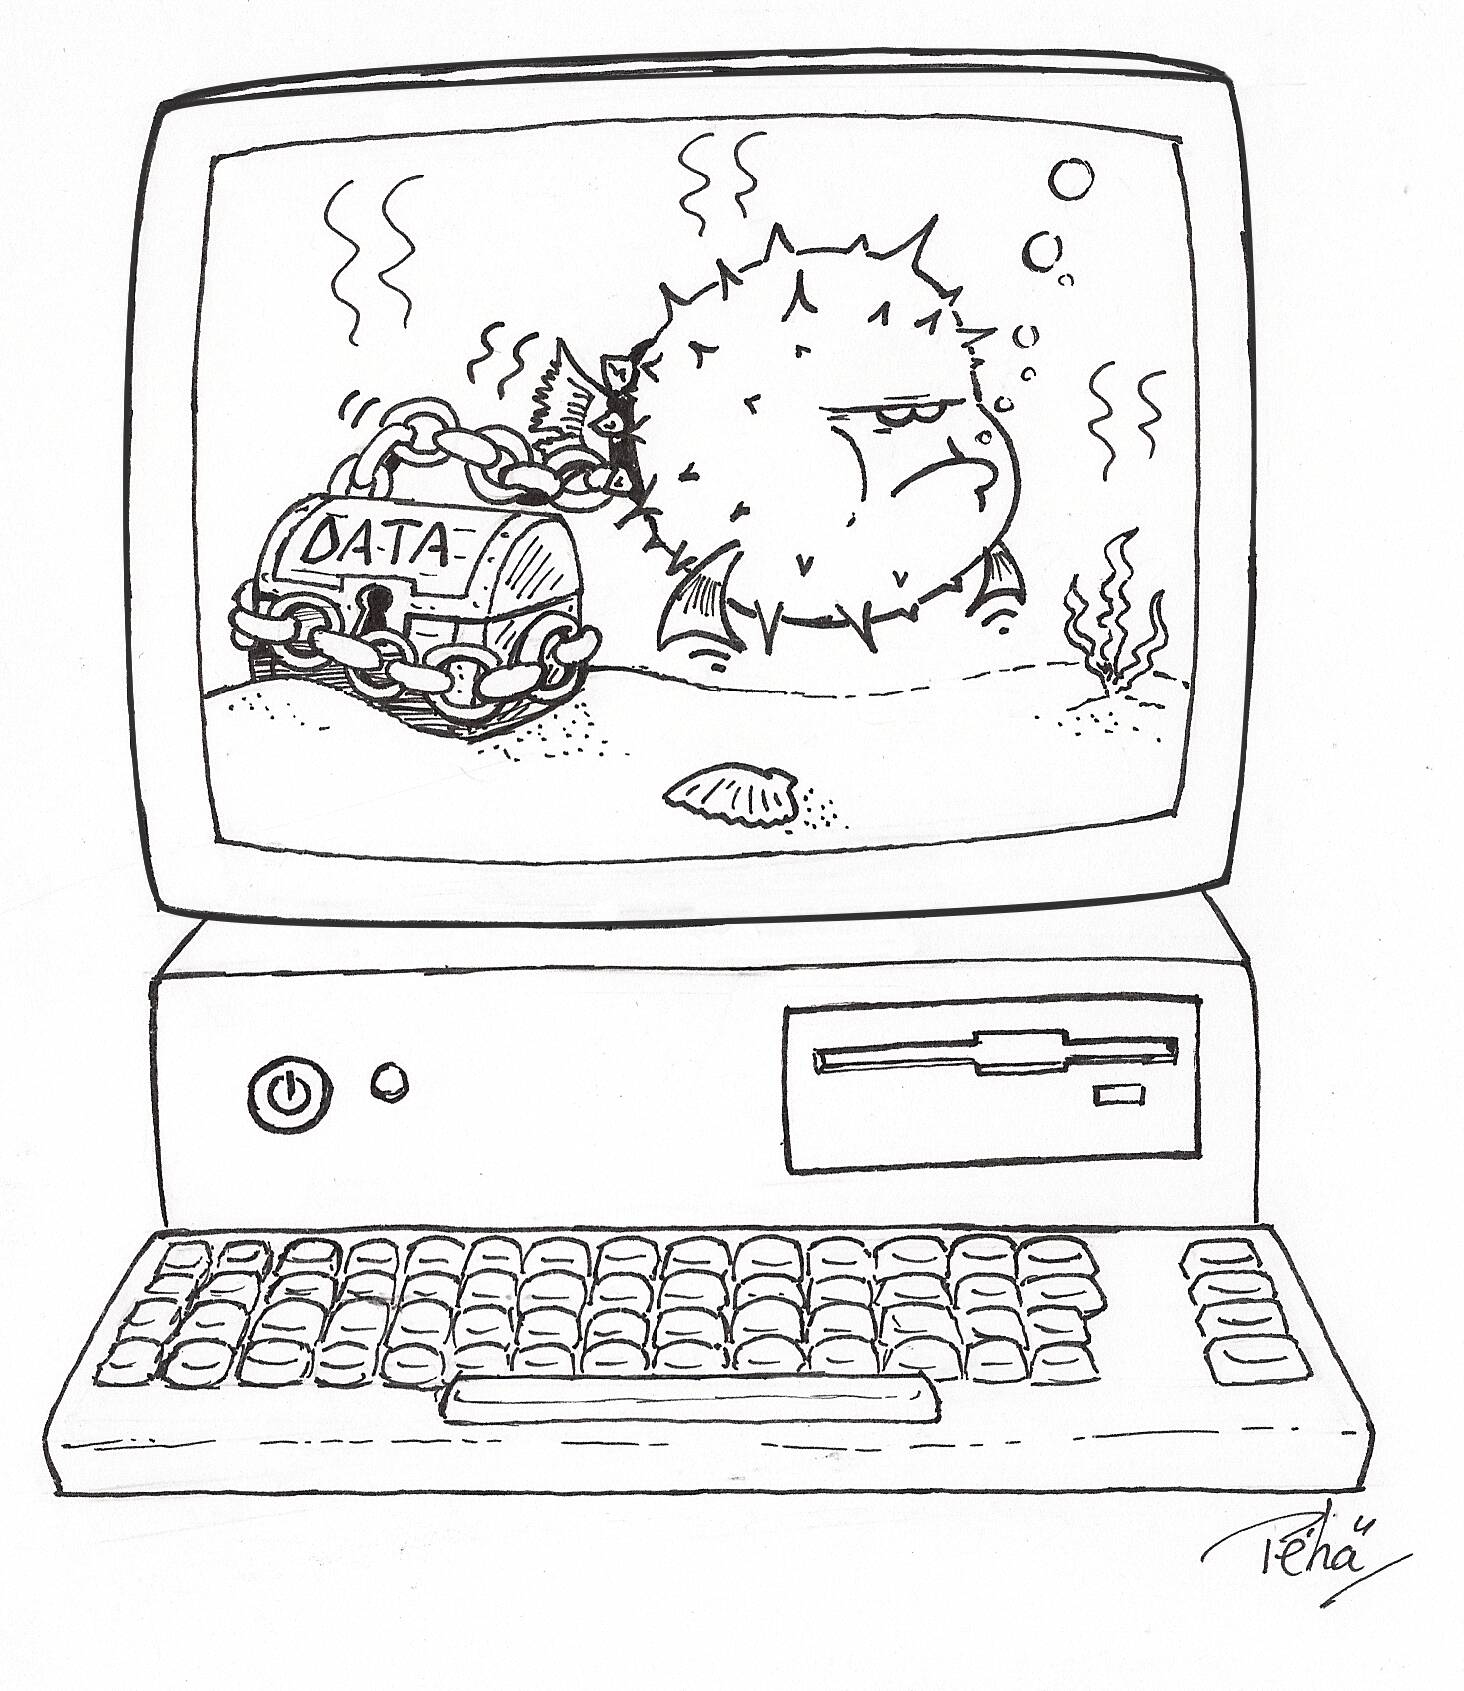 The picture shows an old fashion computer with a CRT screen on top of the tower which has a floppy drive.  The screen is showing a treasure on the seadbed with data labelled on it, there is a huge chain around it that is bound to a big angry puffer fish, like a dog guard.